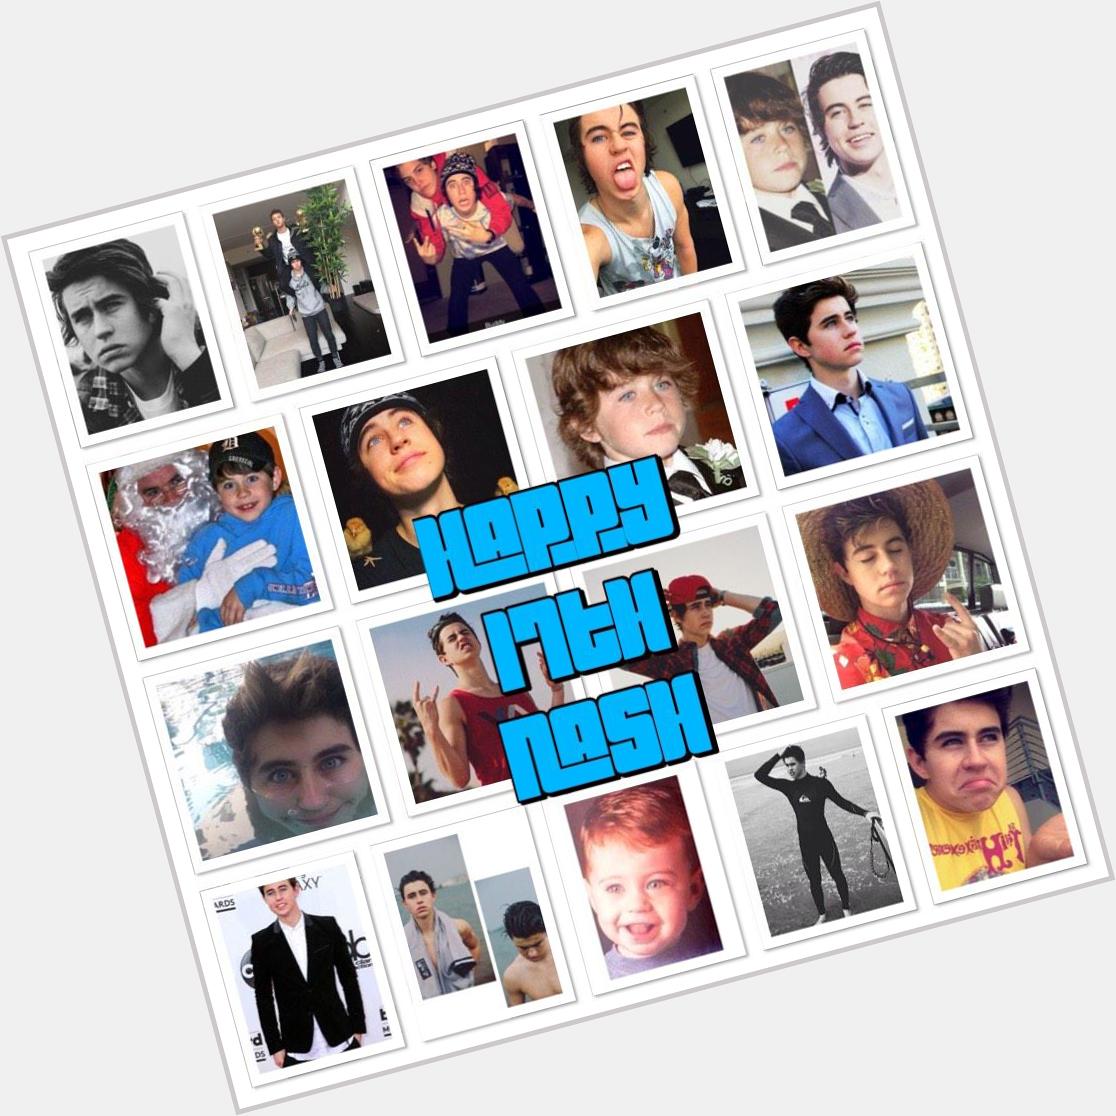 Happy 17th Birthday Hamilton Nash Grier!  Have an amazing day Babe!  Love you lots! 